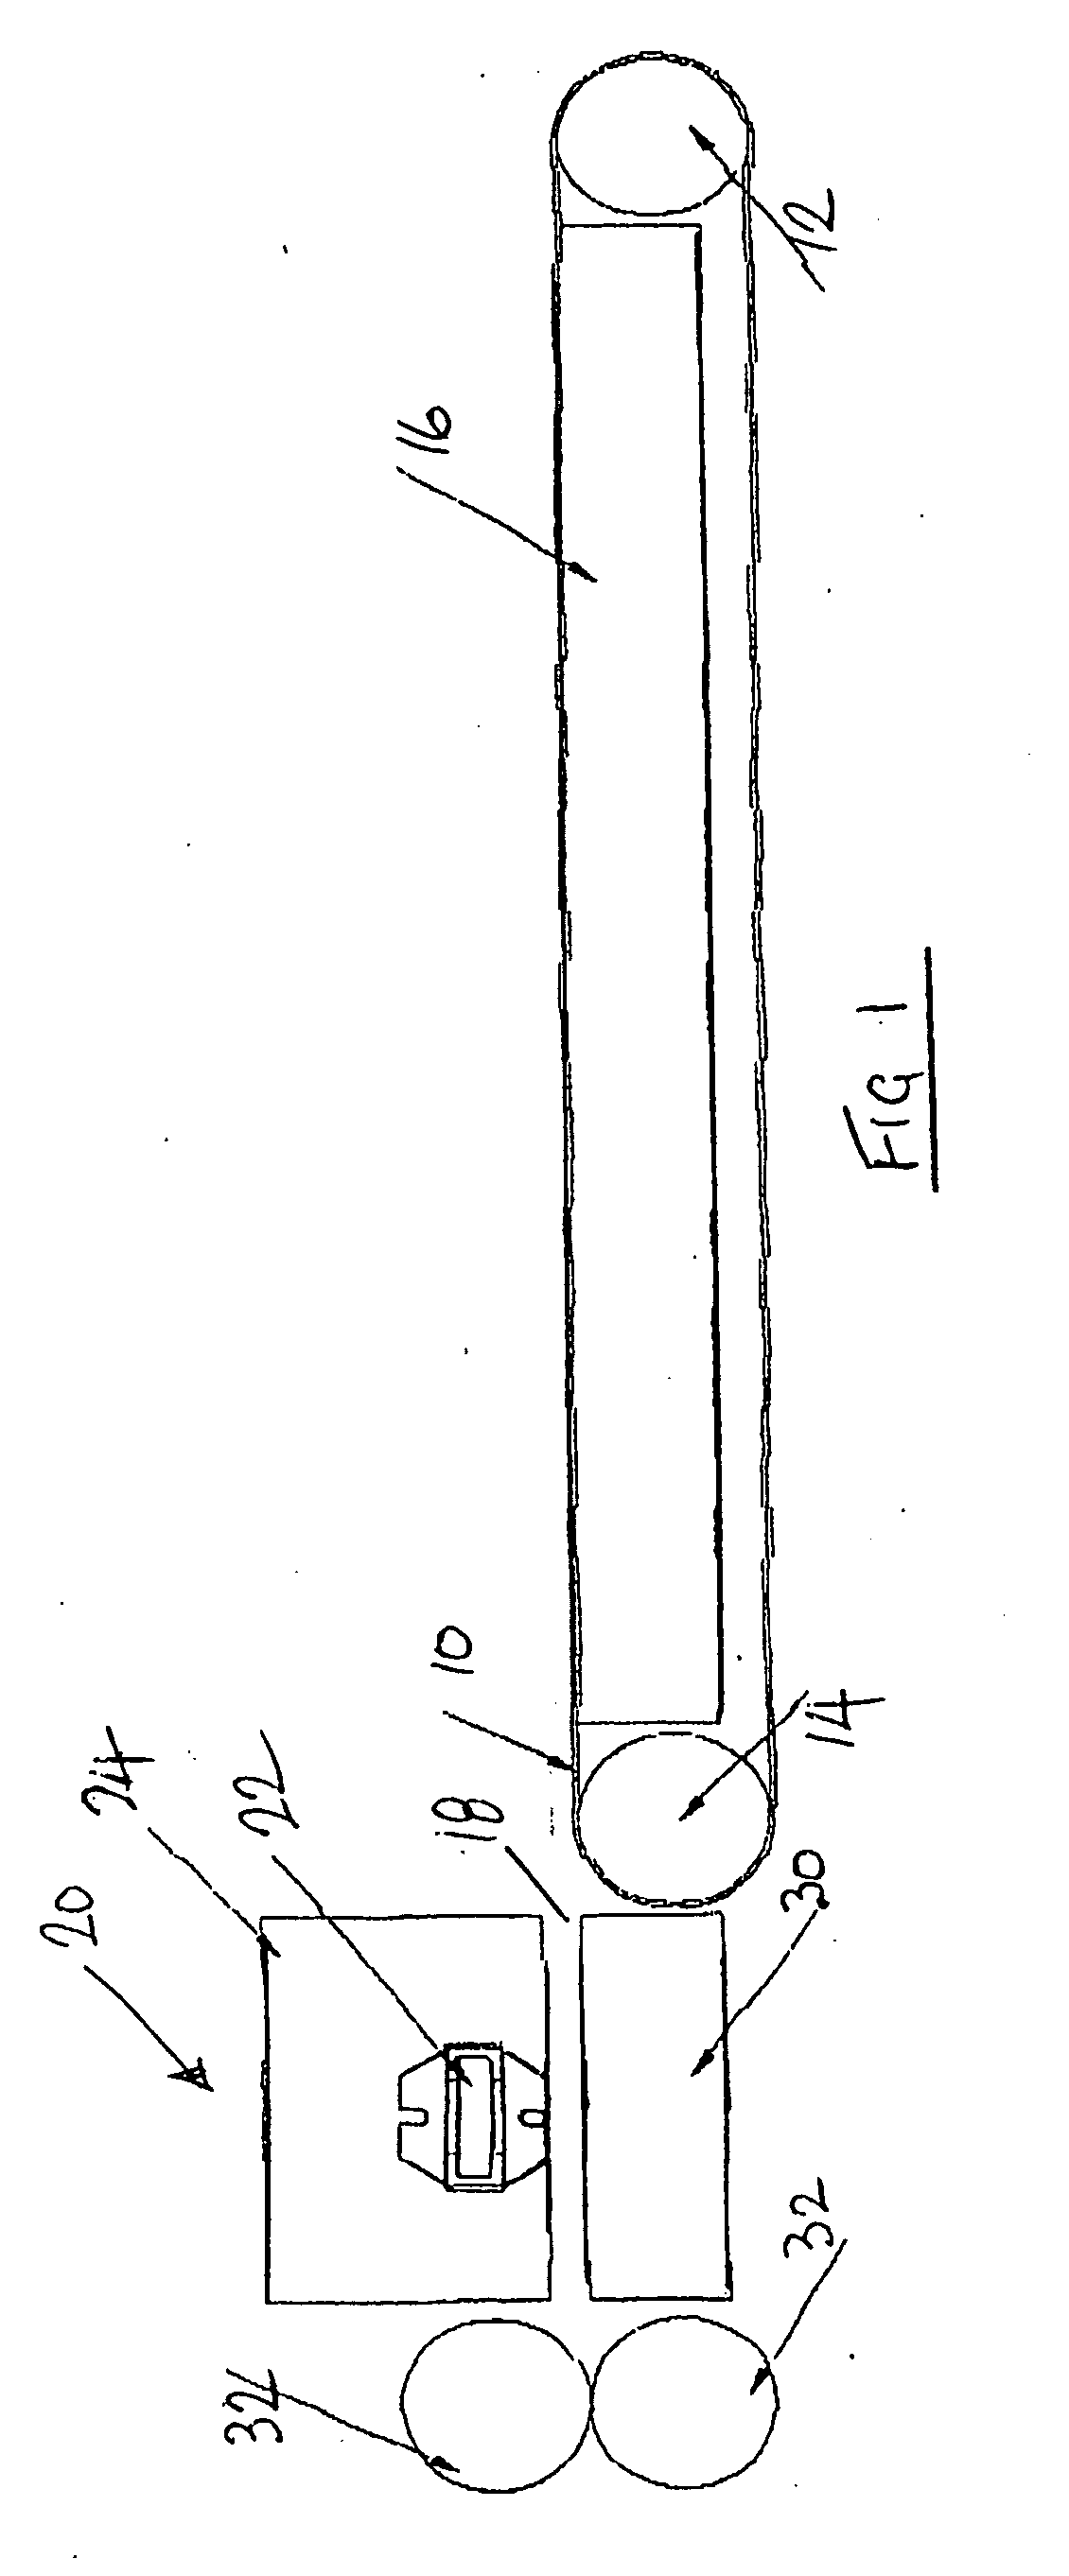 Apparatus including a treatment station for ink on a paper or other substrate